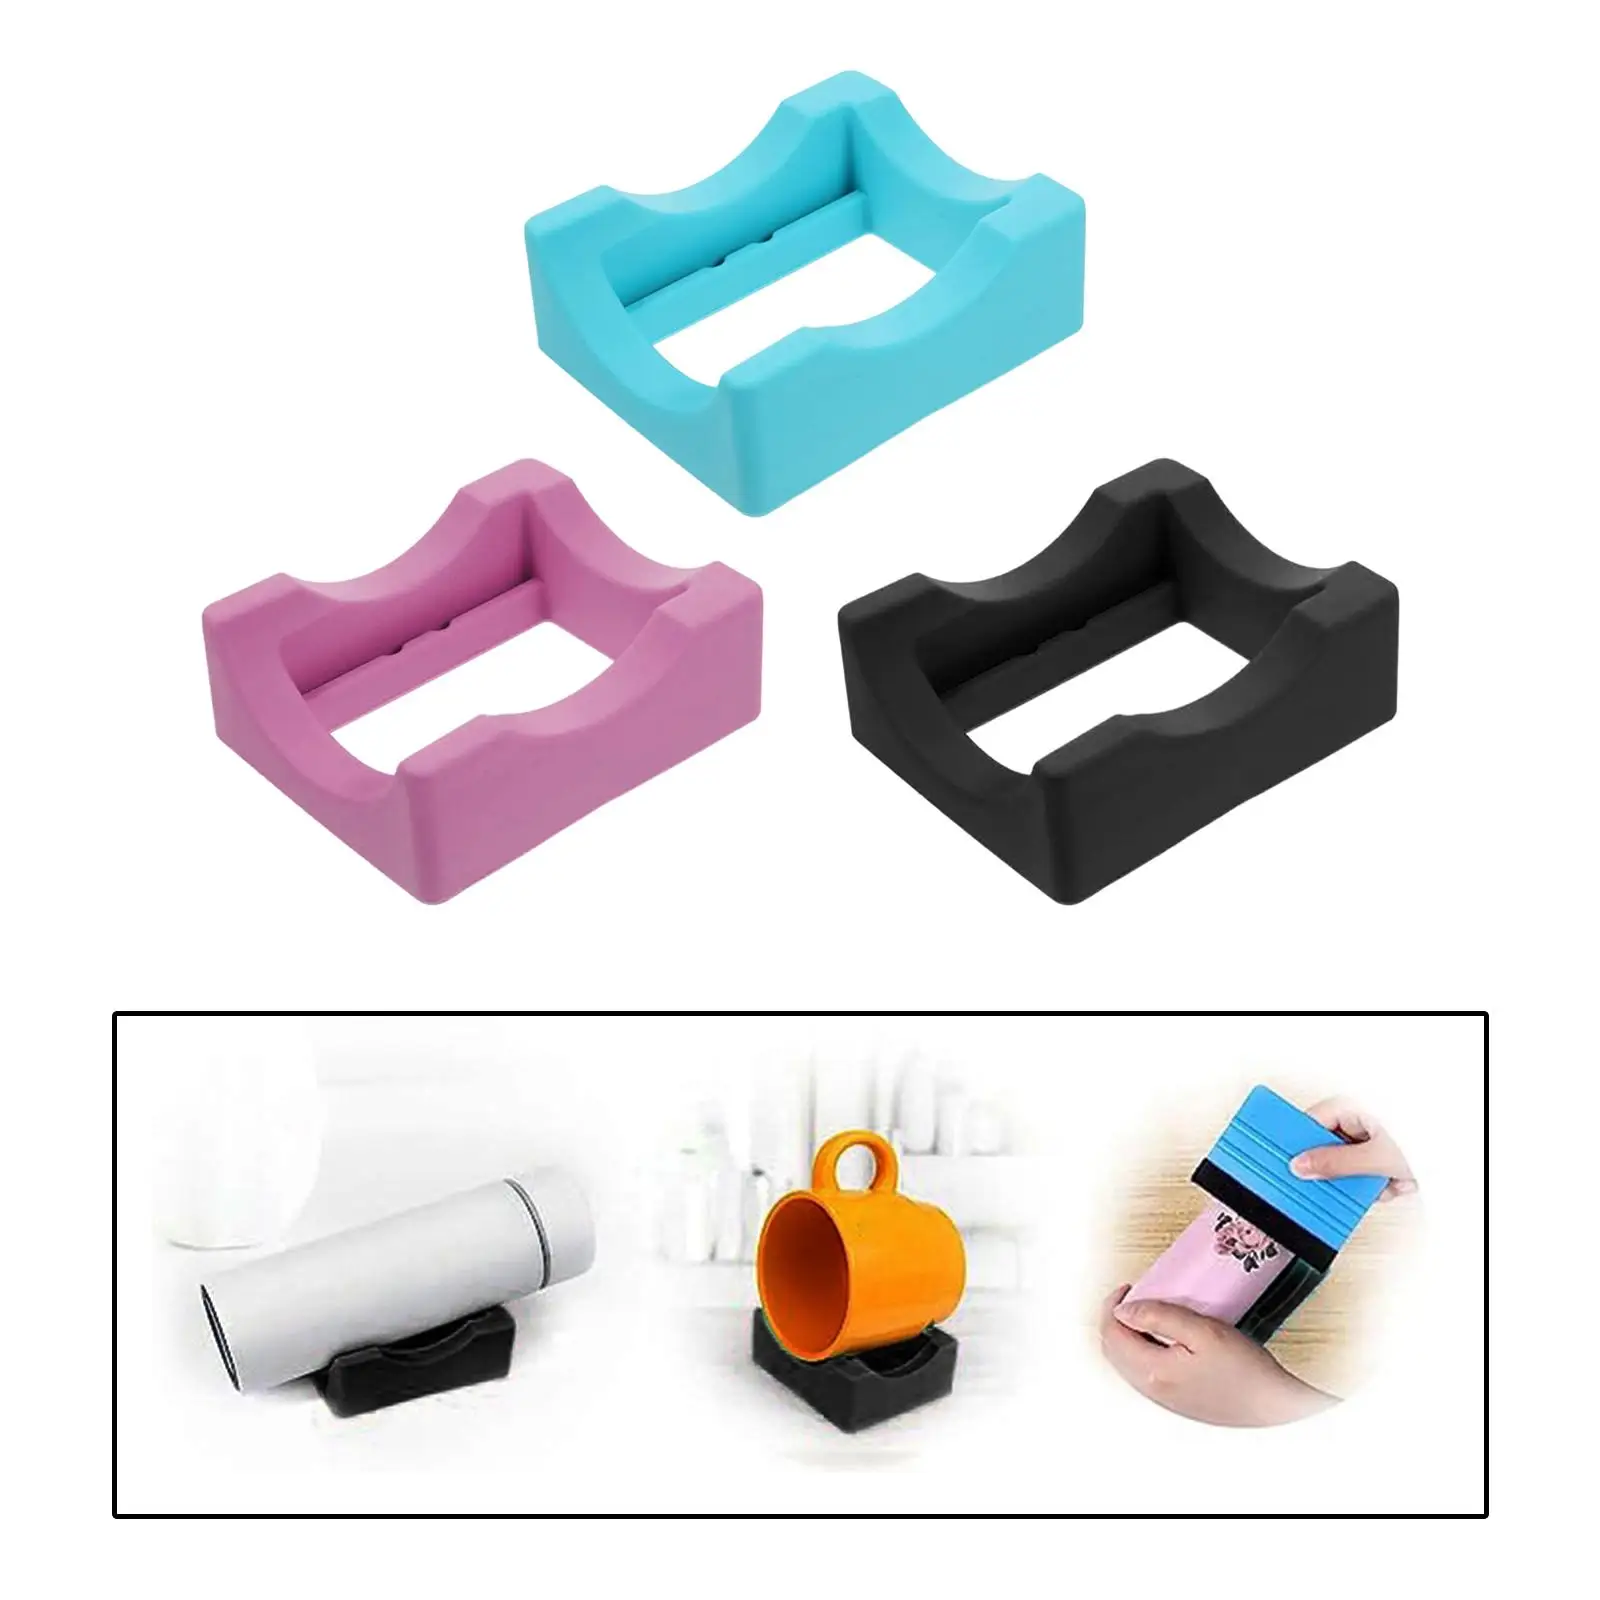 Cup Cradle with Slot 2 Angle Supports Tumbler Cradle Tumbler Holder for DIY Tumblers Crafts Making Tumblers Cups Bottle